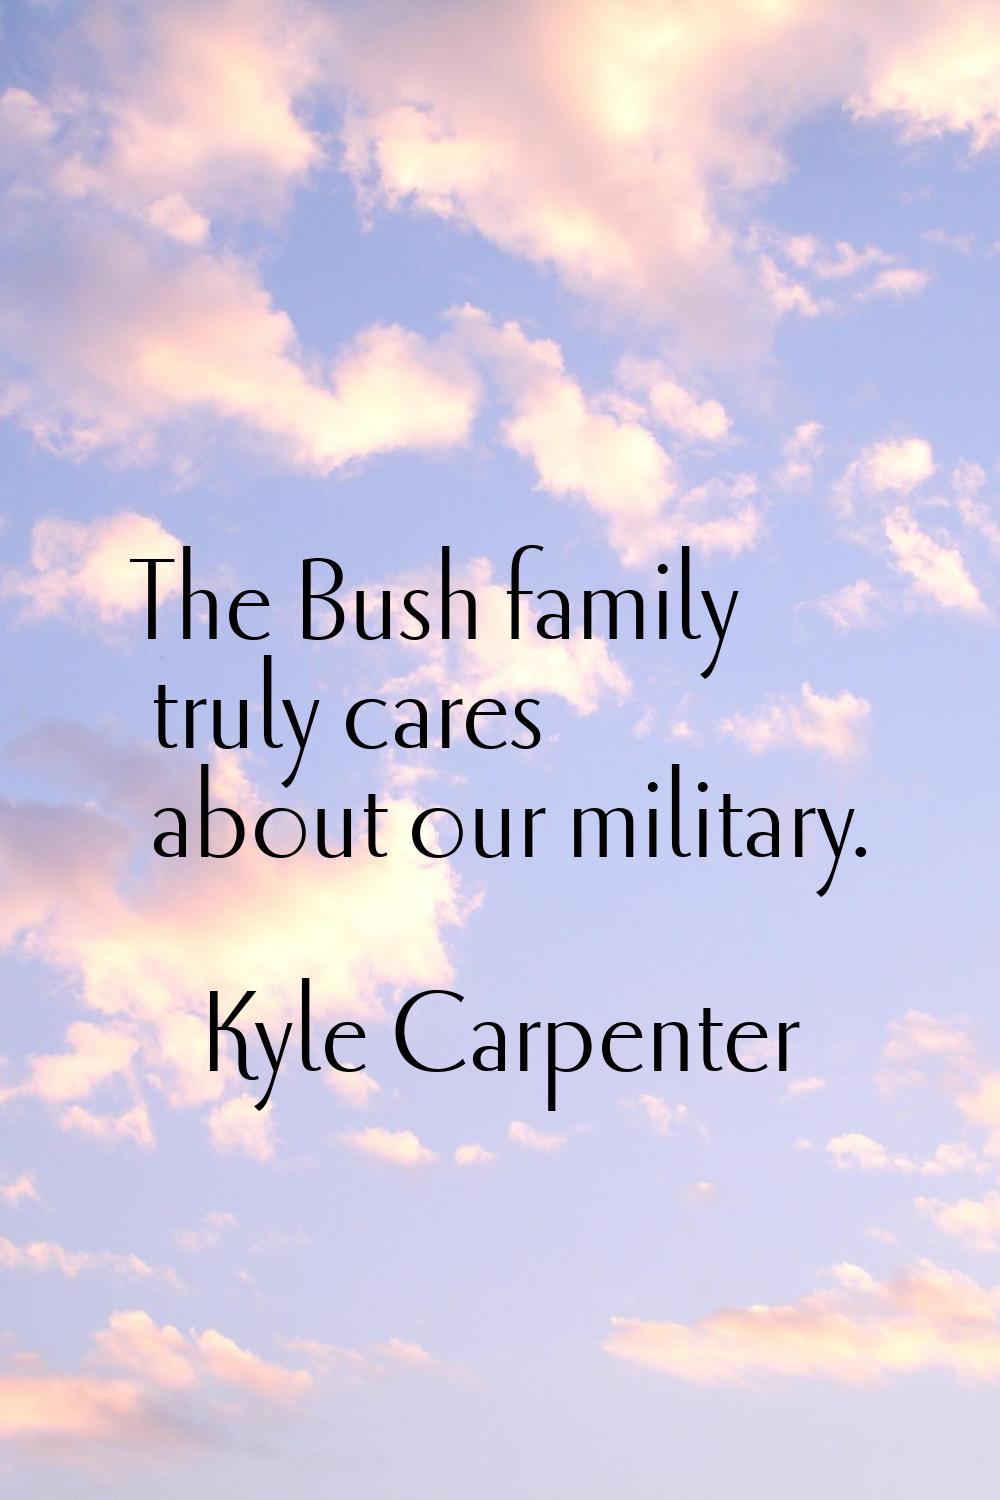 The Bush family truly cares about our military.